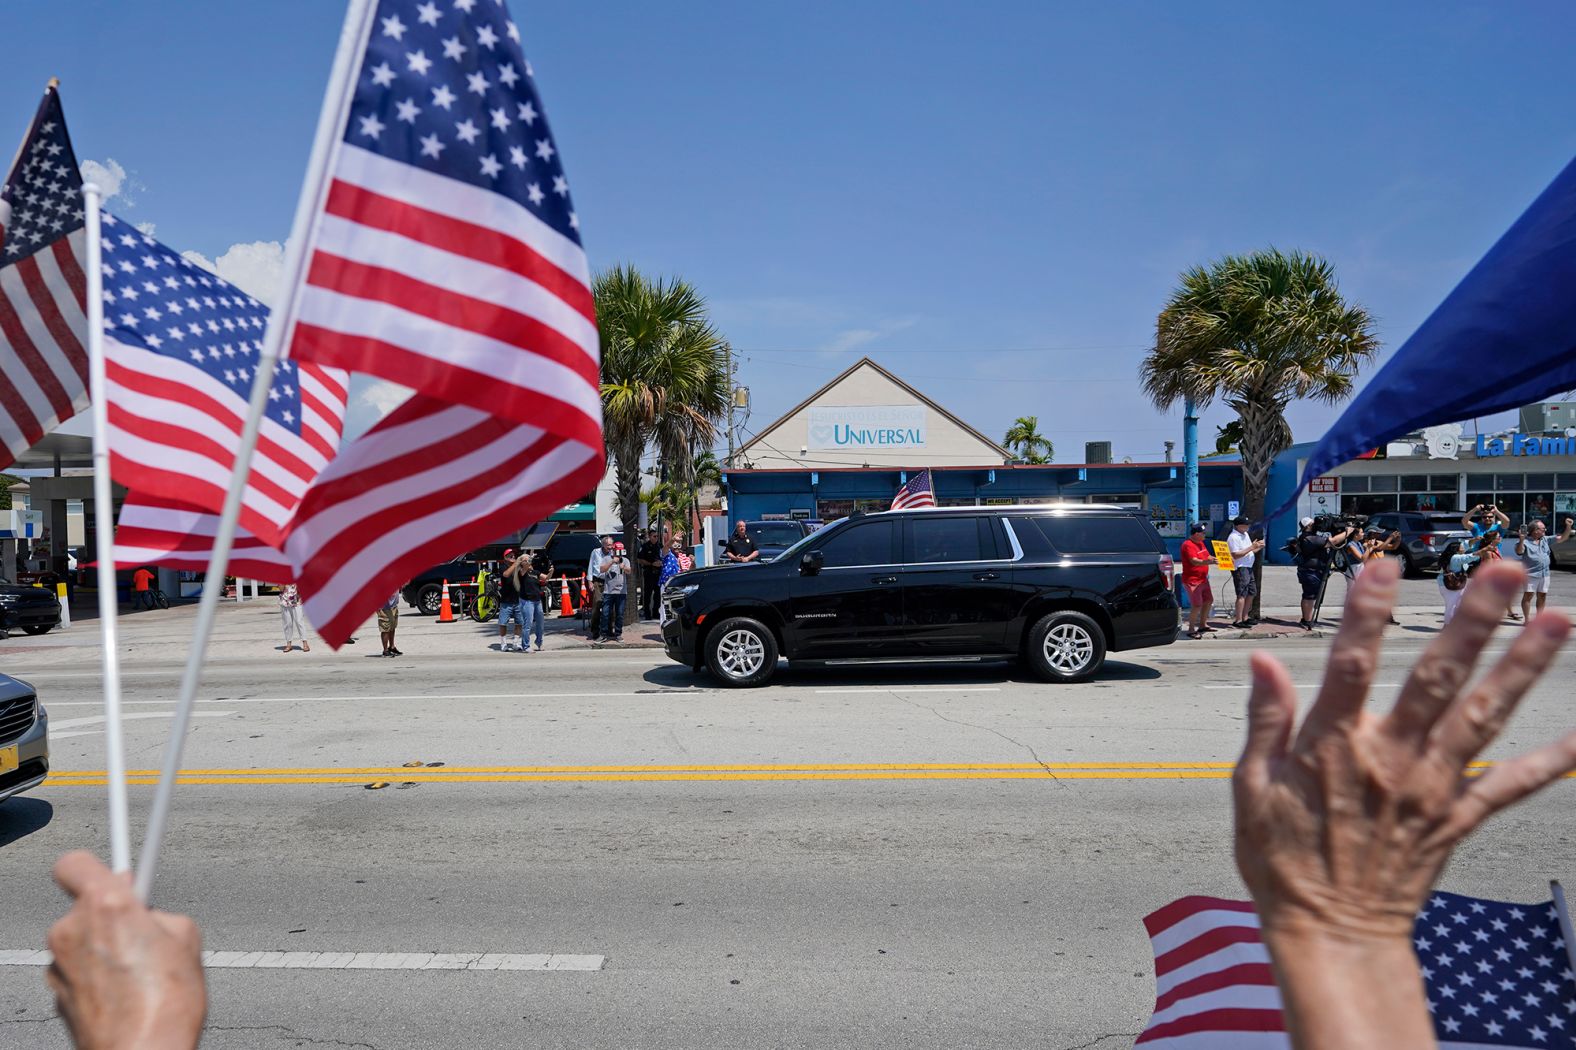 Trump supporters cheer as his motorcade passes by in West Palm Beach, Florida, on April 3, 2023.